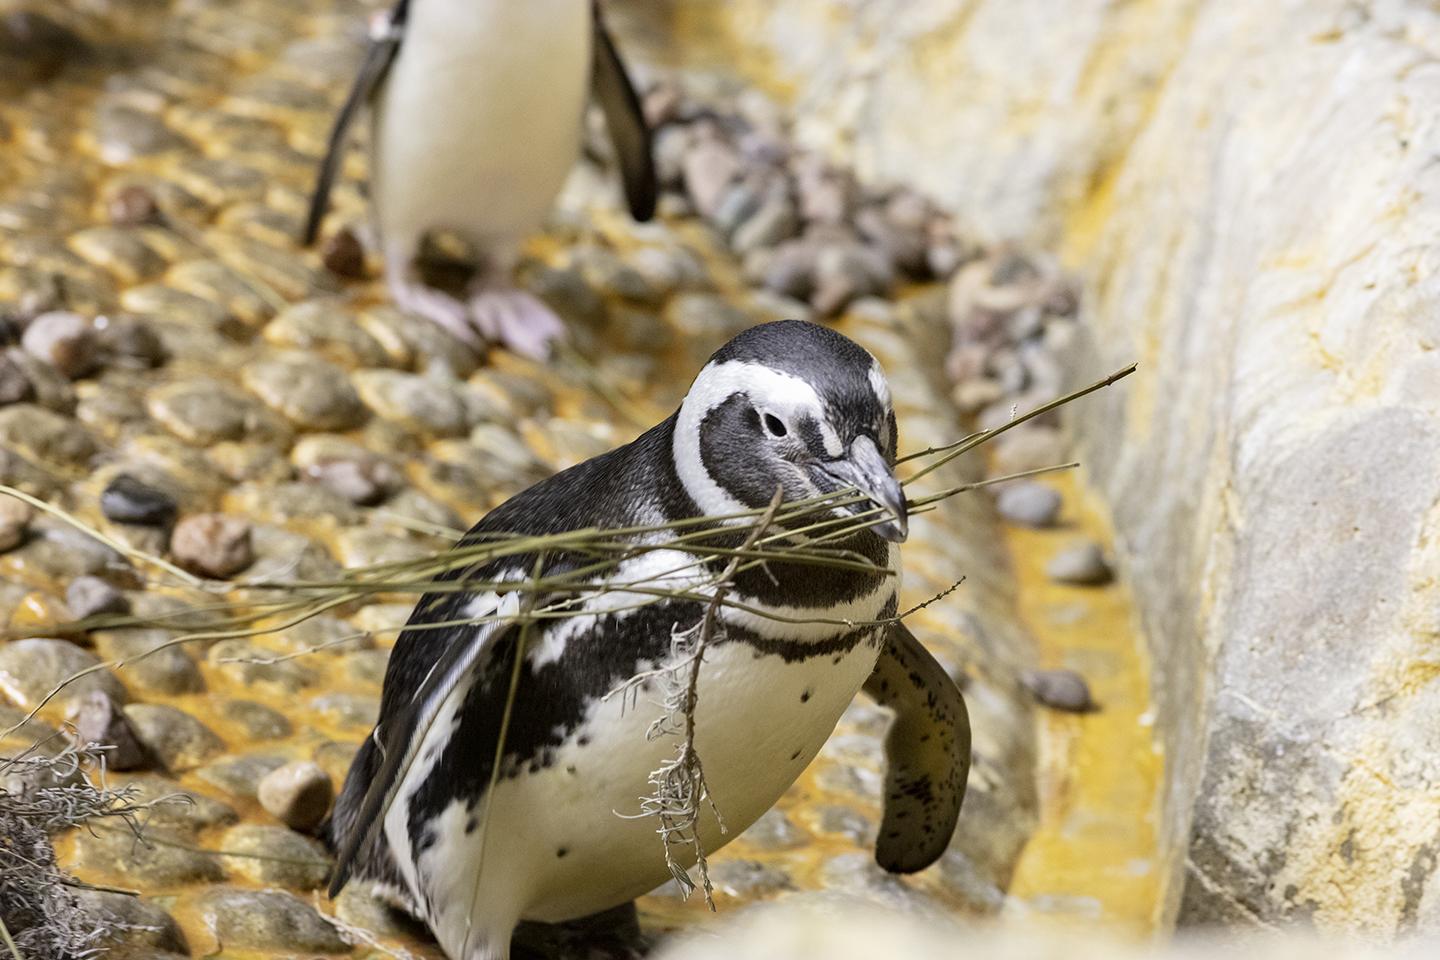 Magellanic penguins use twigs and other branchy materials to build their nests. (Brenna Hernandez / Shedd Aquarium)